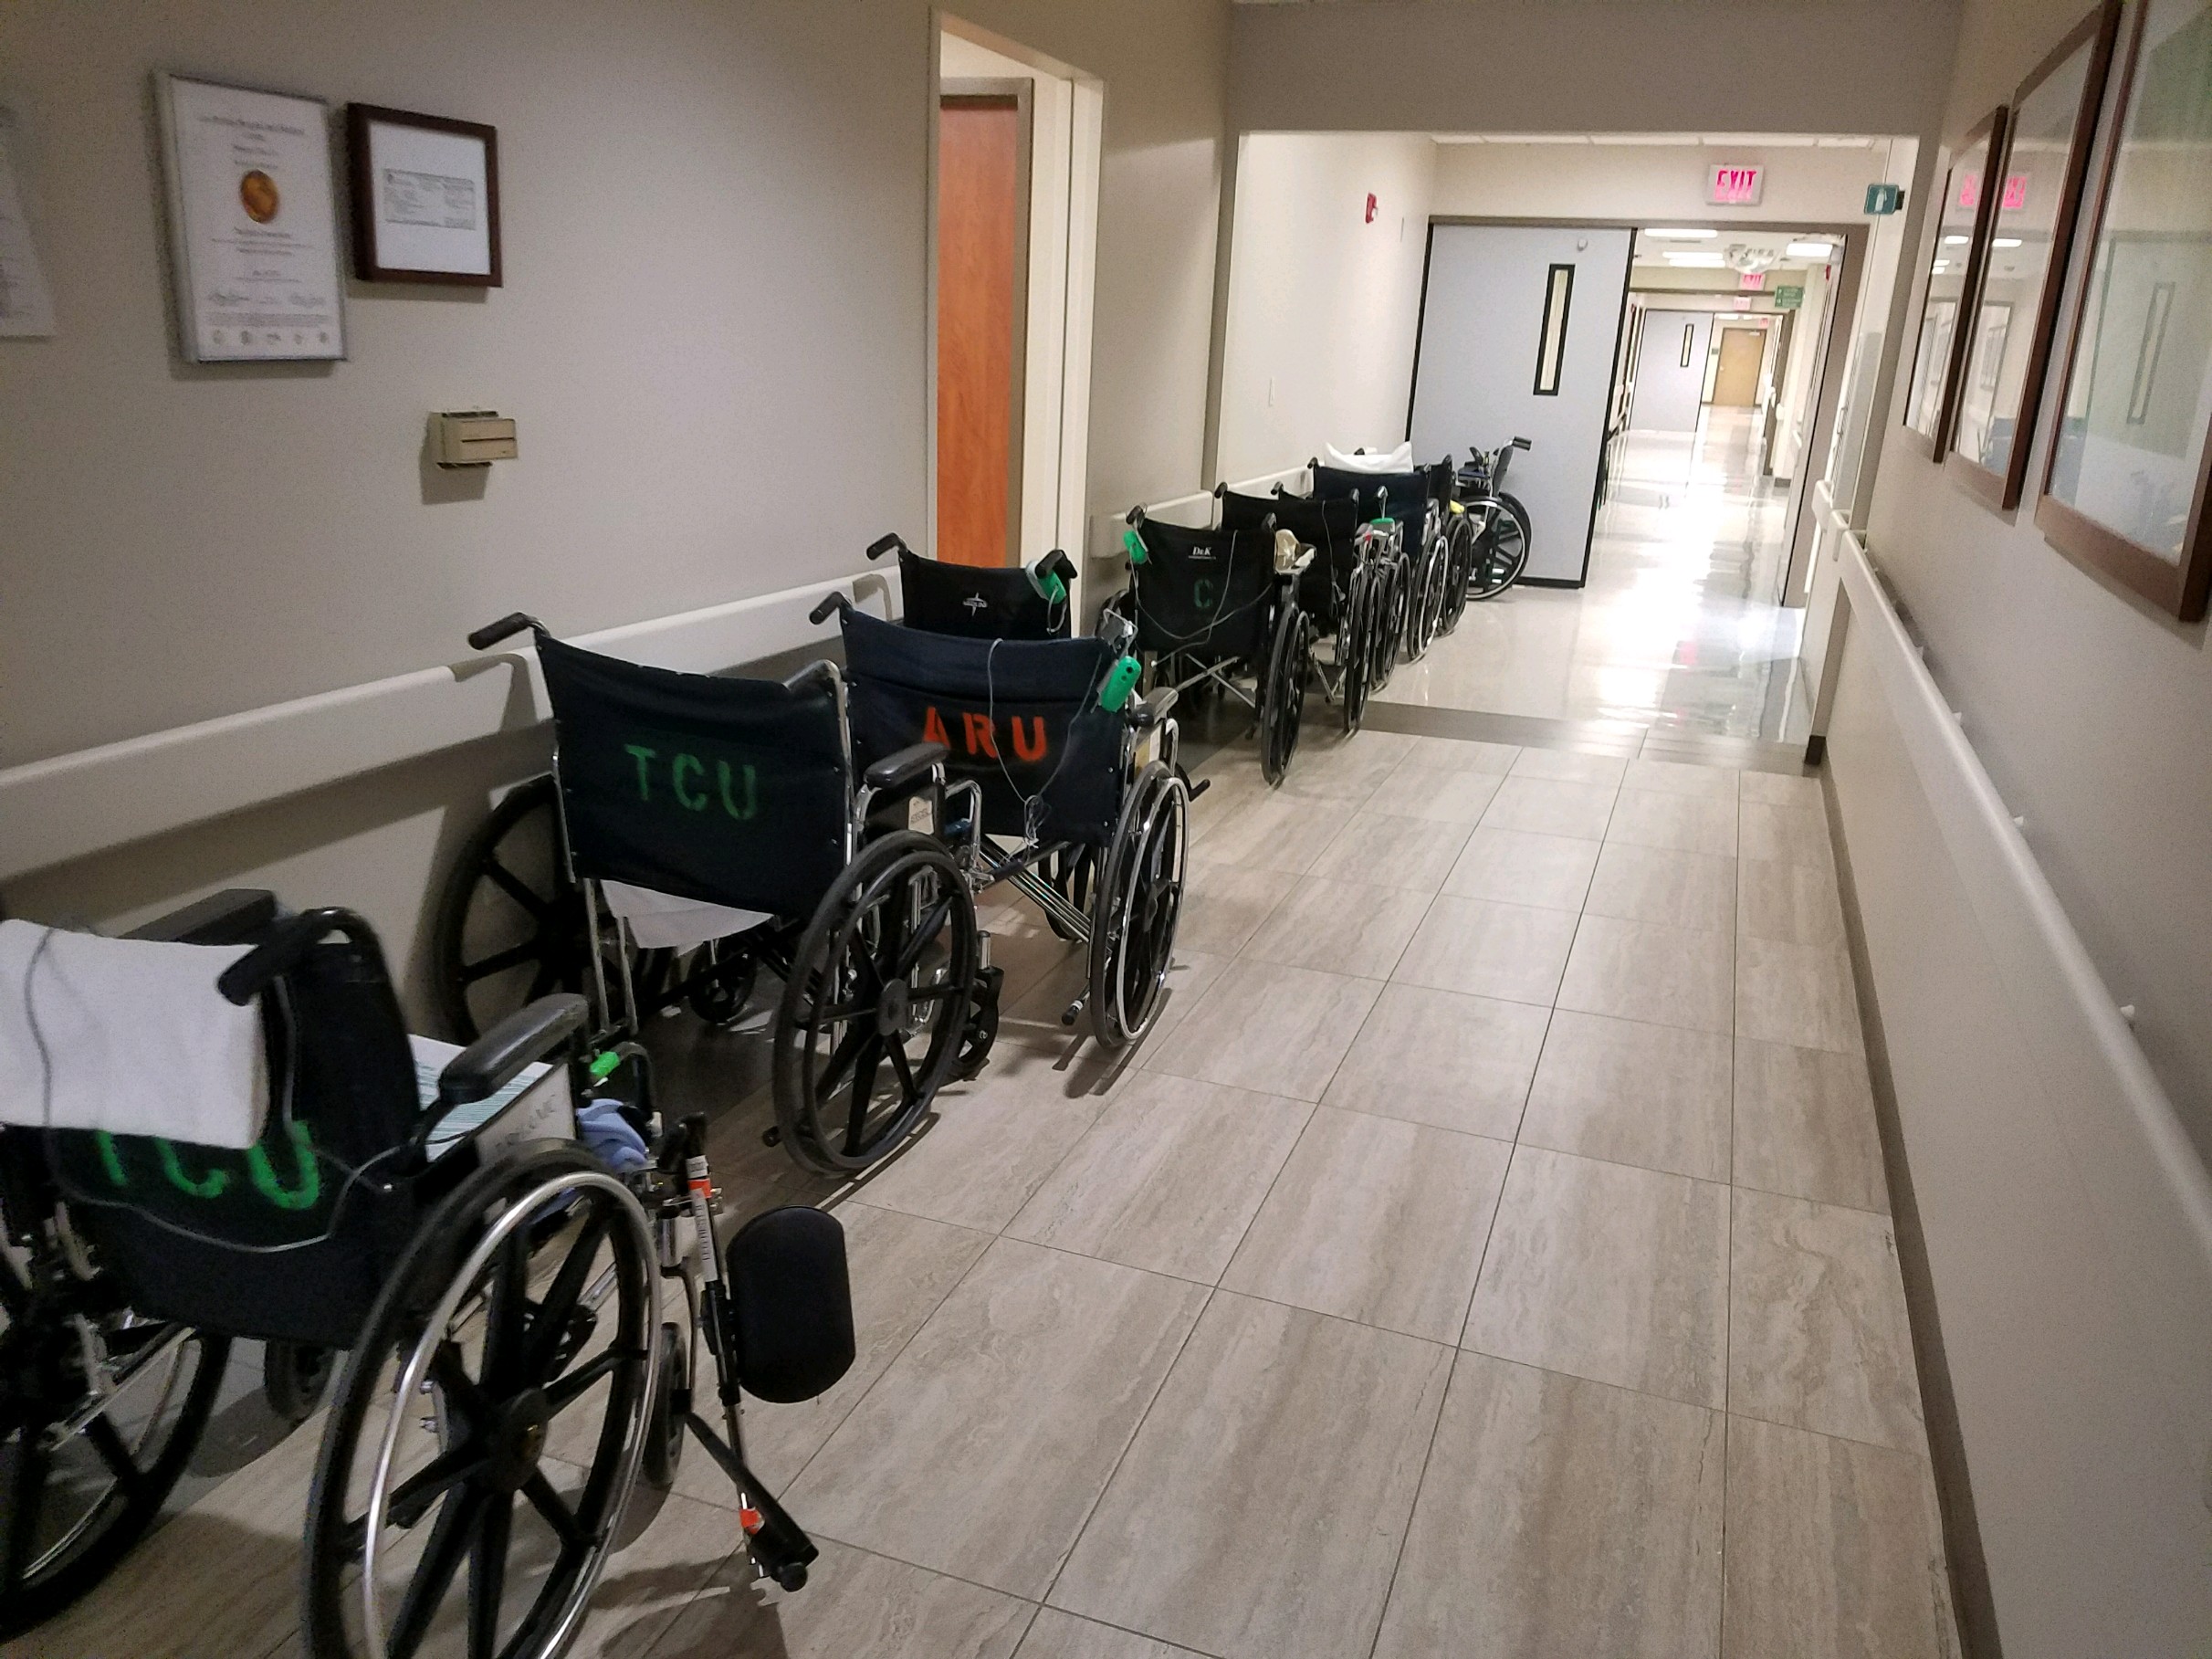 Wheelchairs lined up along a hospital hallway